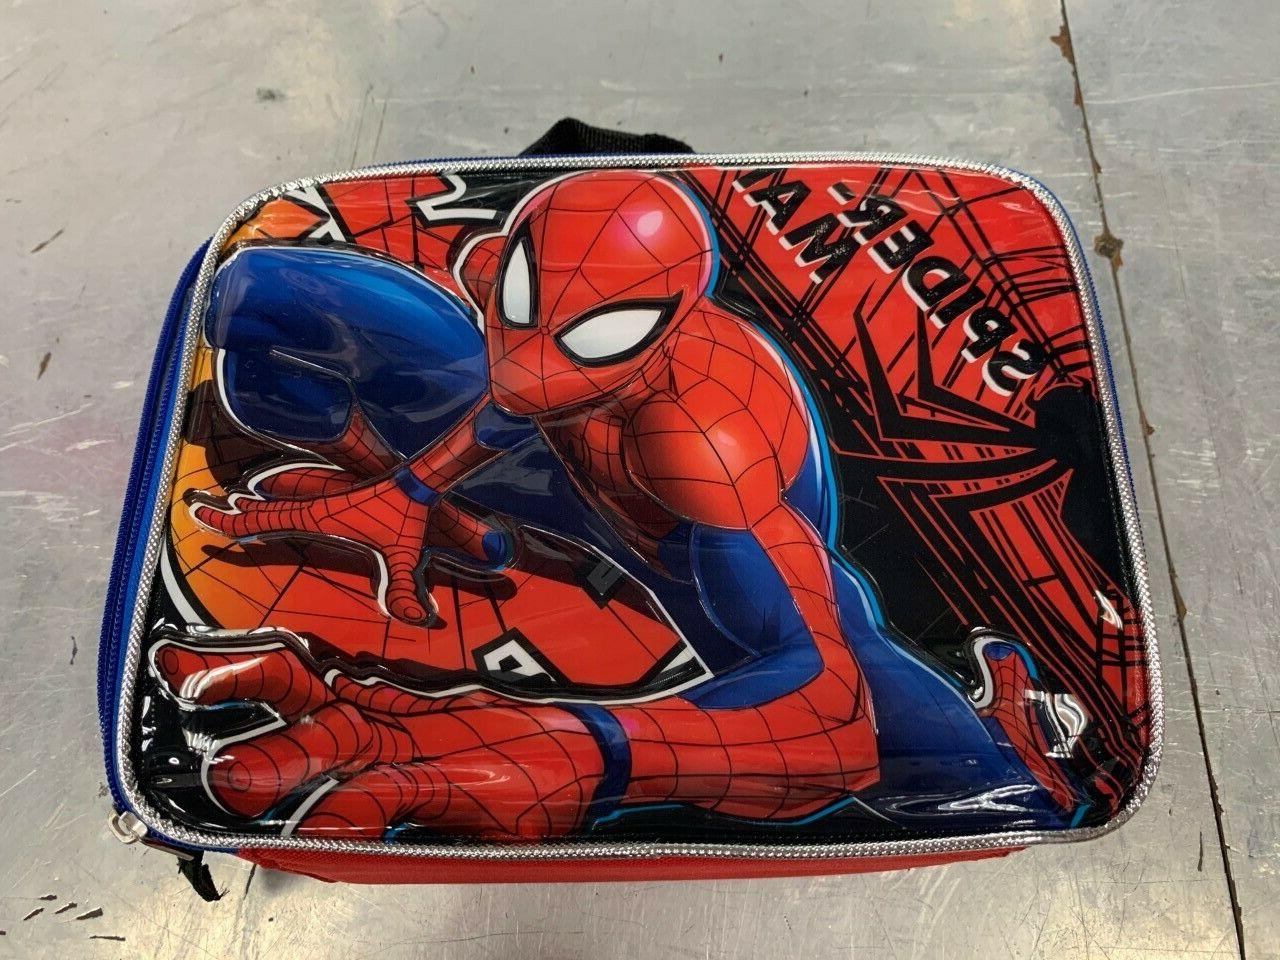 Spiderman Movie School Lunch Box Bag Thermos Insulated Snack Food Kids Gift  Toy